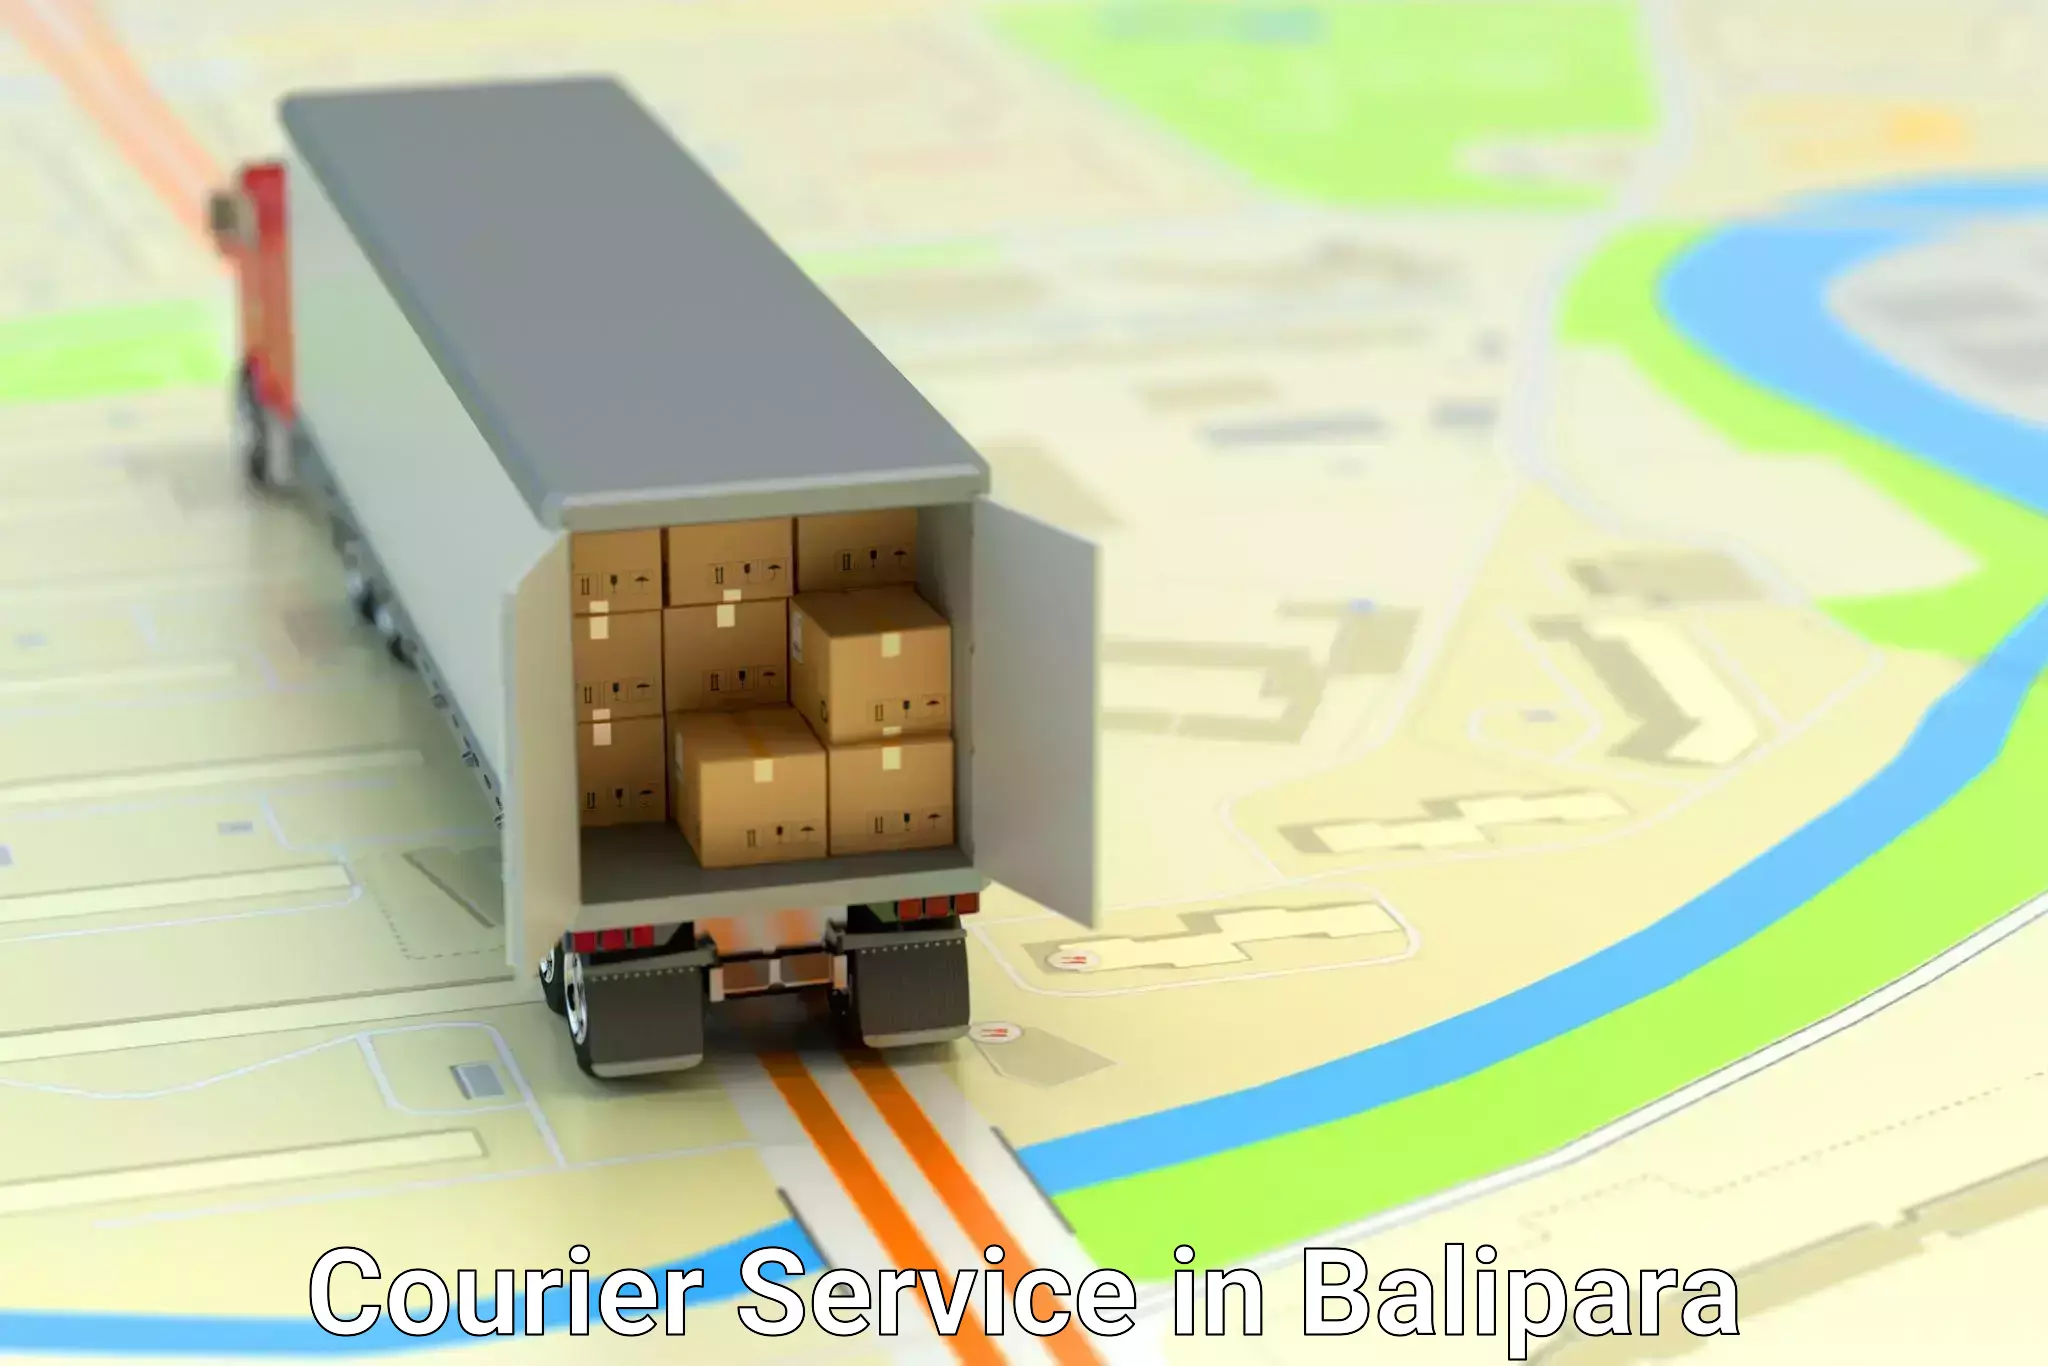 Efficient parcel delivery in Balipara